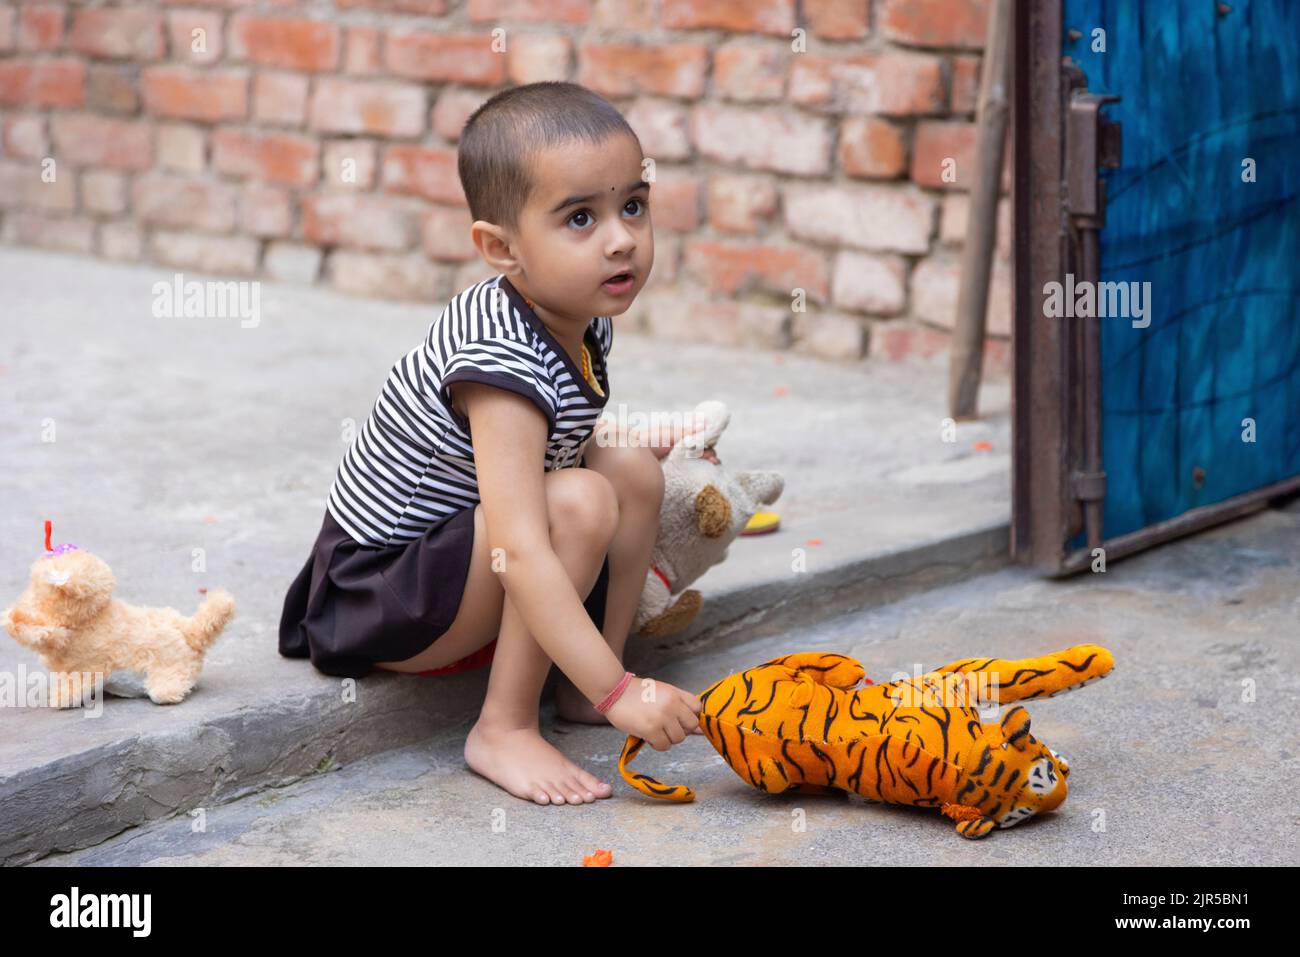 Portrait of a cute innocent child playing with the toys Stock Photo